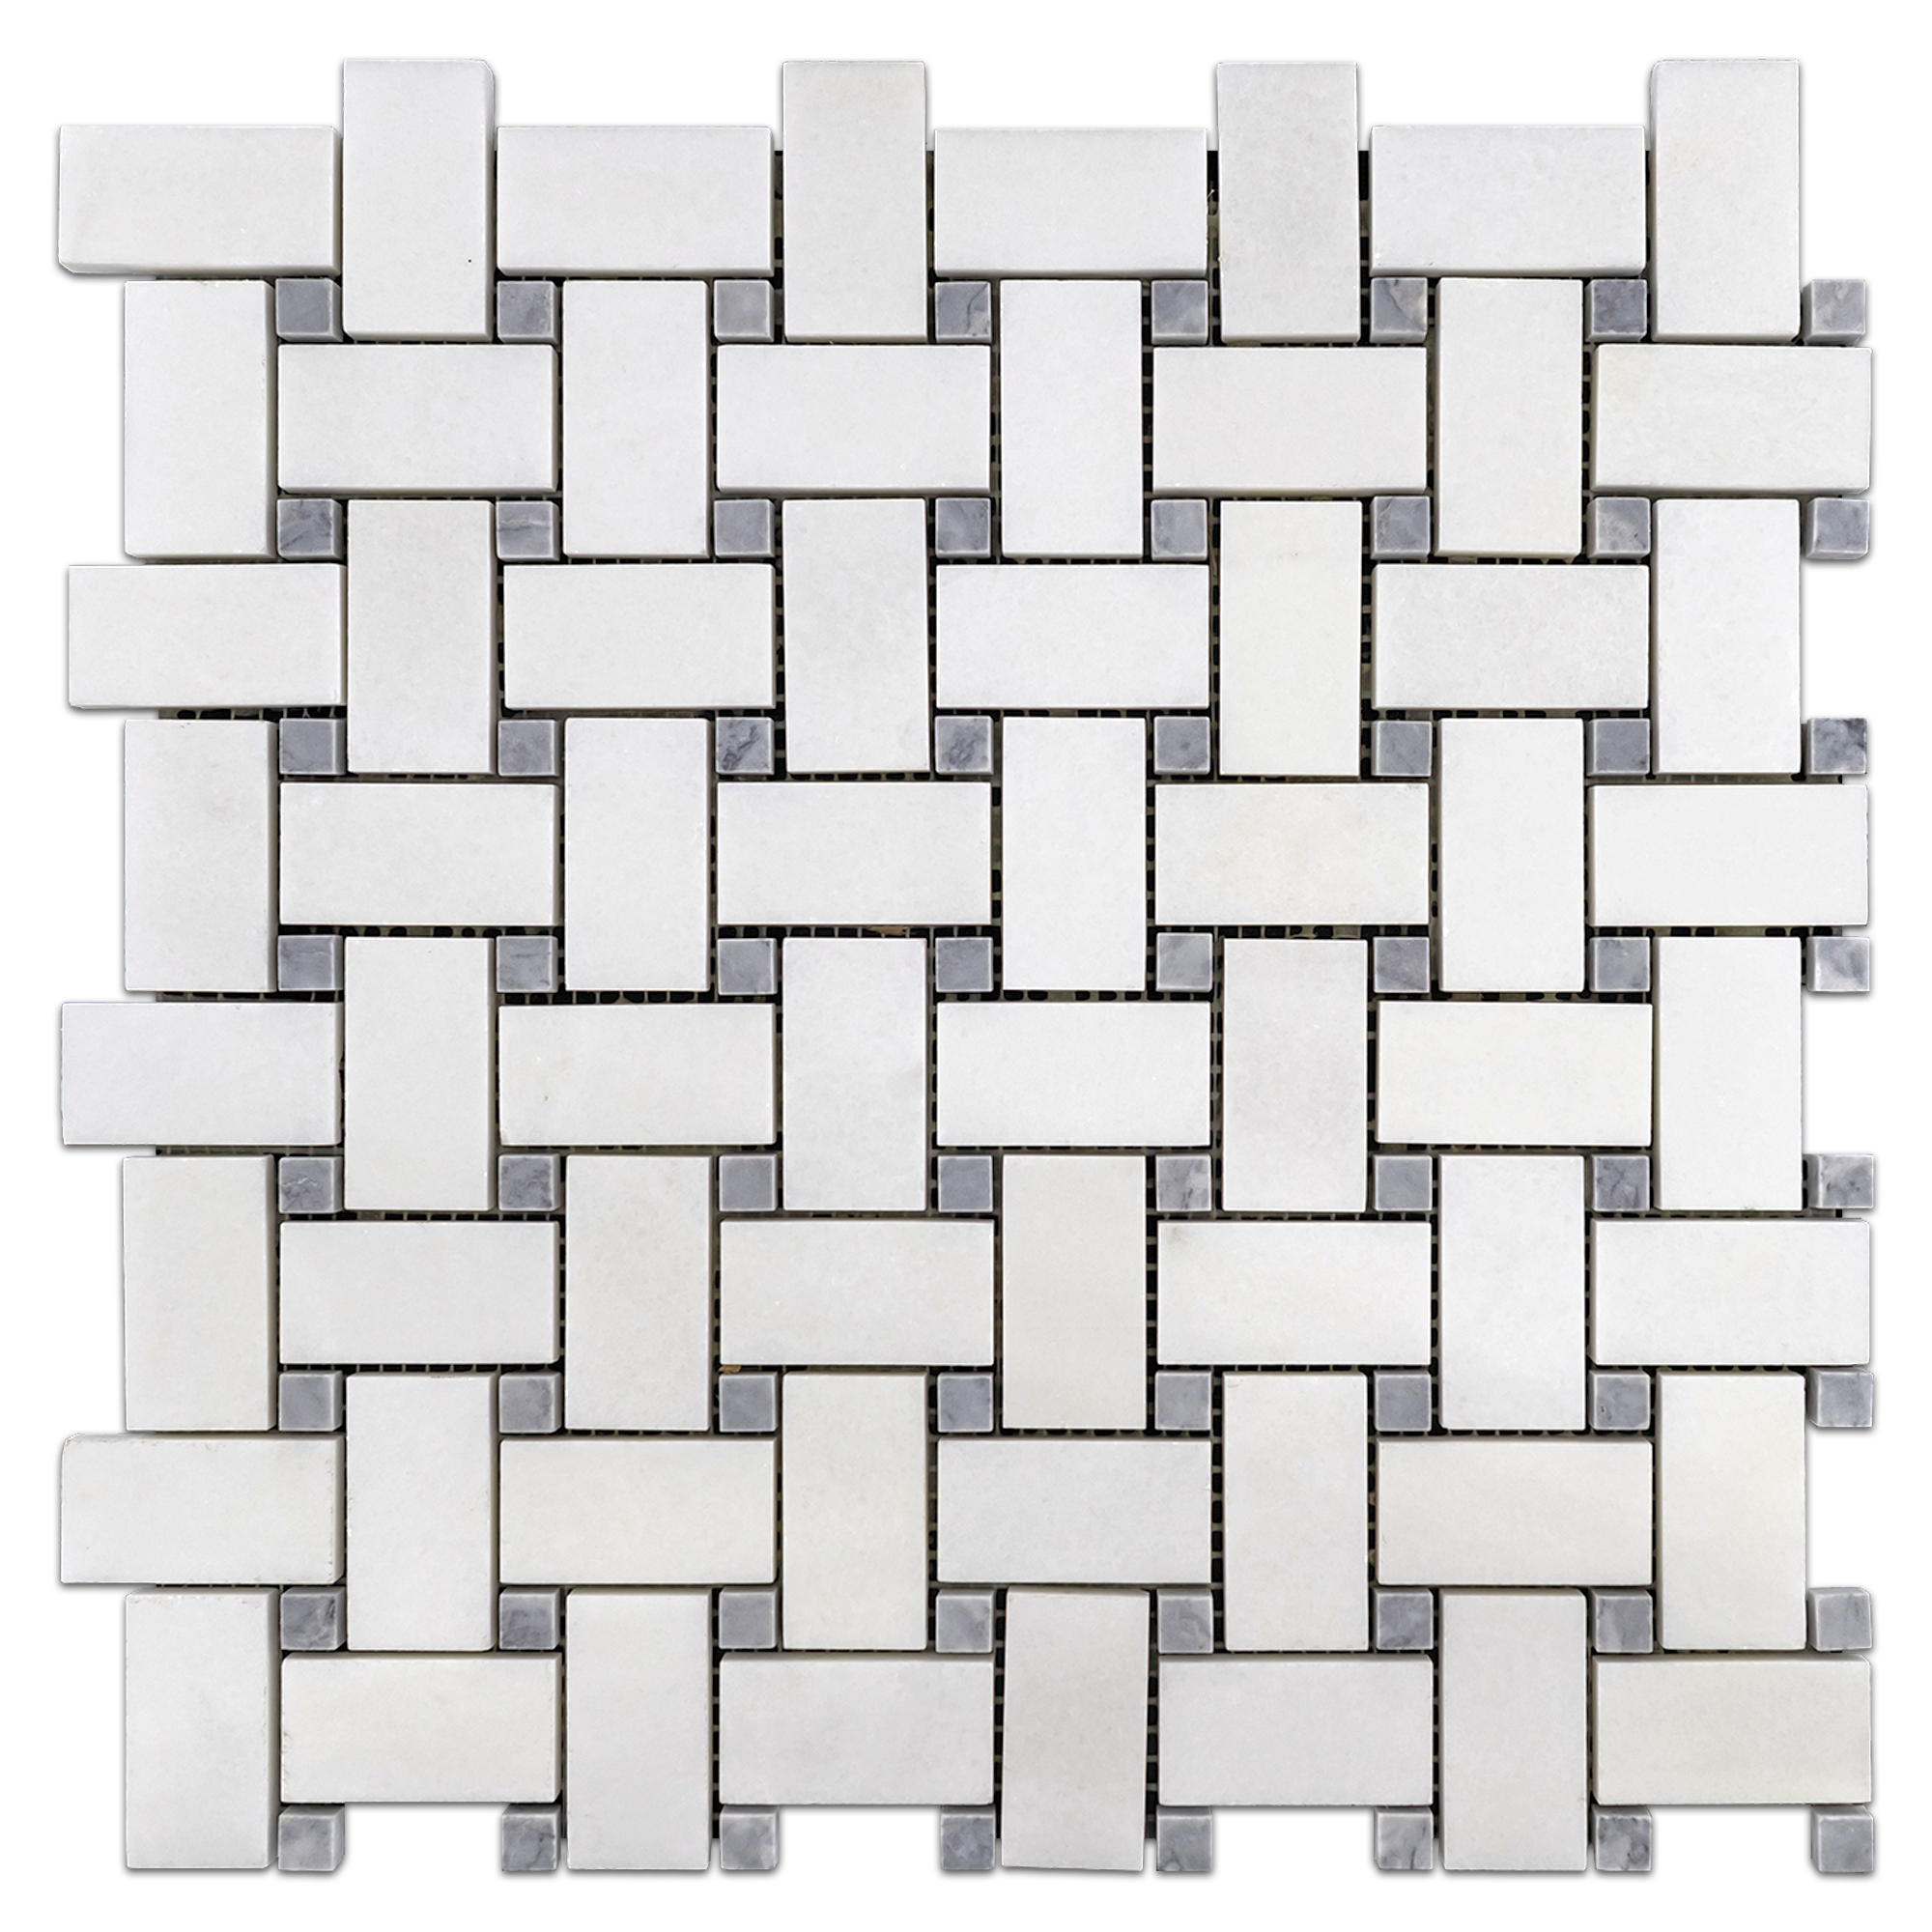 Elon White Thassos Pacific Gray Marble Stone Blend Basketweave Field Mosaic 12x12x0.375 Polished AM9048P Surface Group International Product